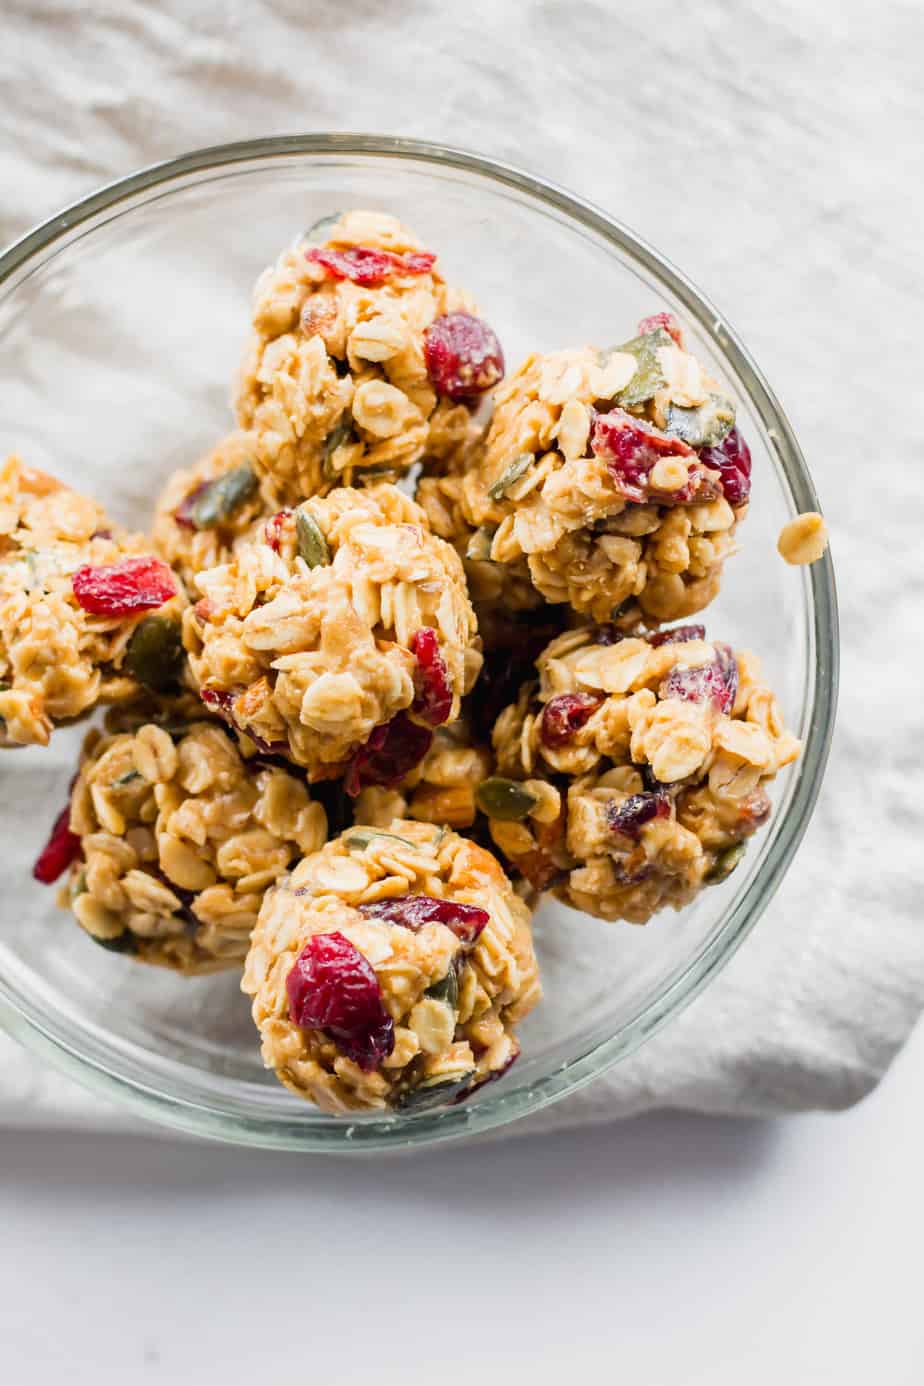 These Cranberry Nut Energy Balls are the perfect vegan, gluten-free snack. They require one bowl to make, are packed with protein and will satisfy that sweet tooth.